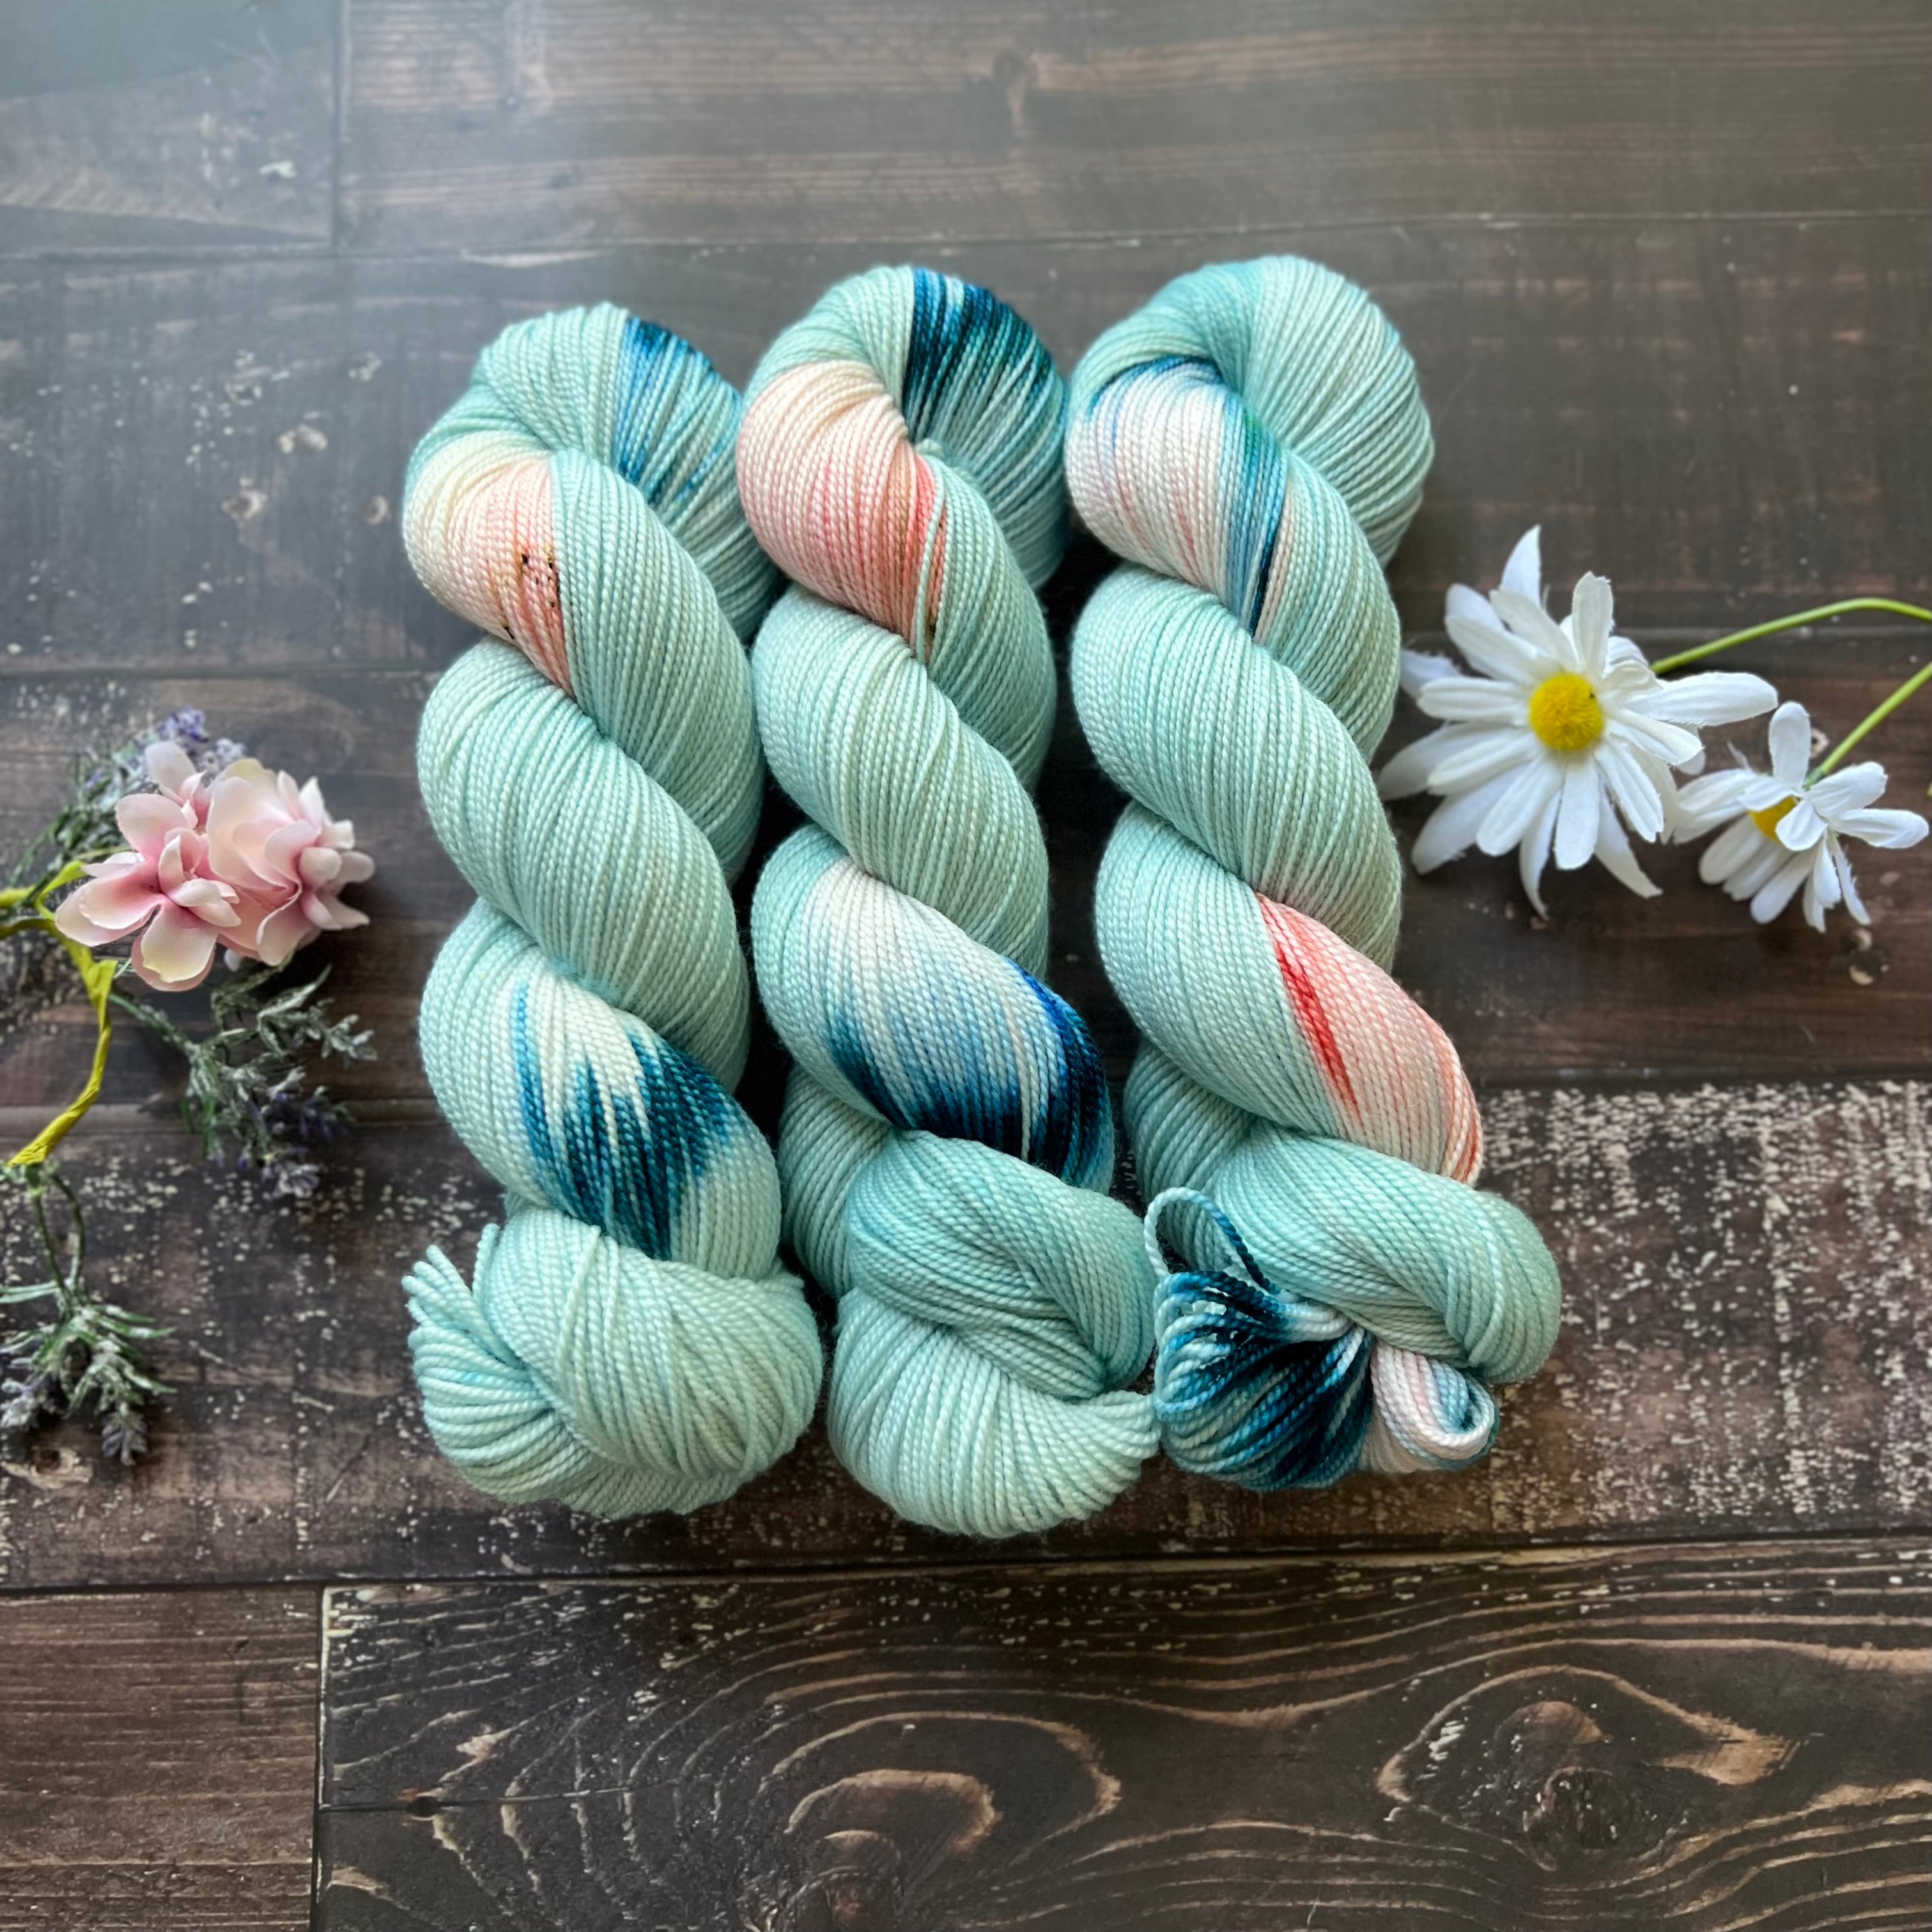 Forget Me Not Assigned Pooling Hand-dyed Yarn - achickthatknitz